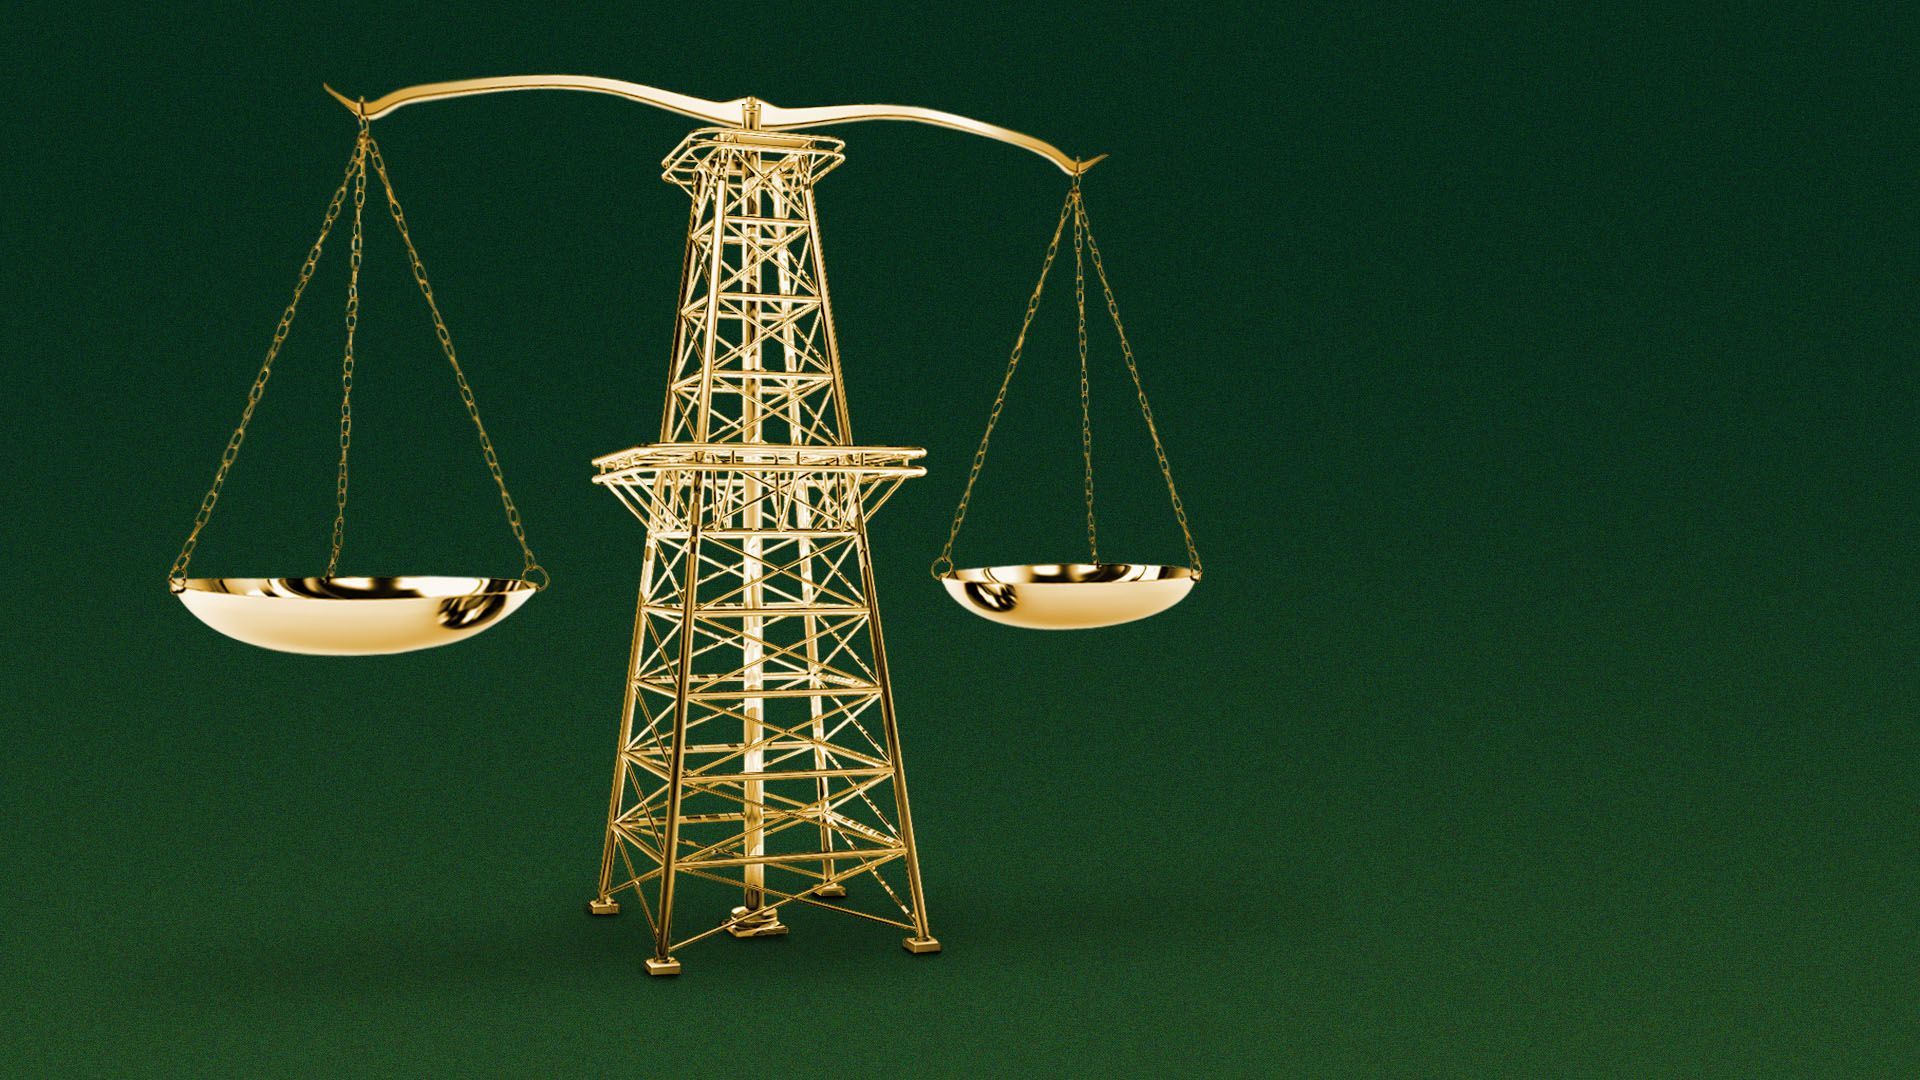 an illustration of a gold metal scales of justice and the middle support is an oil derrick 